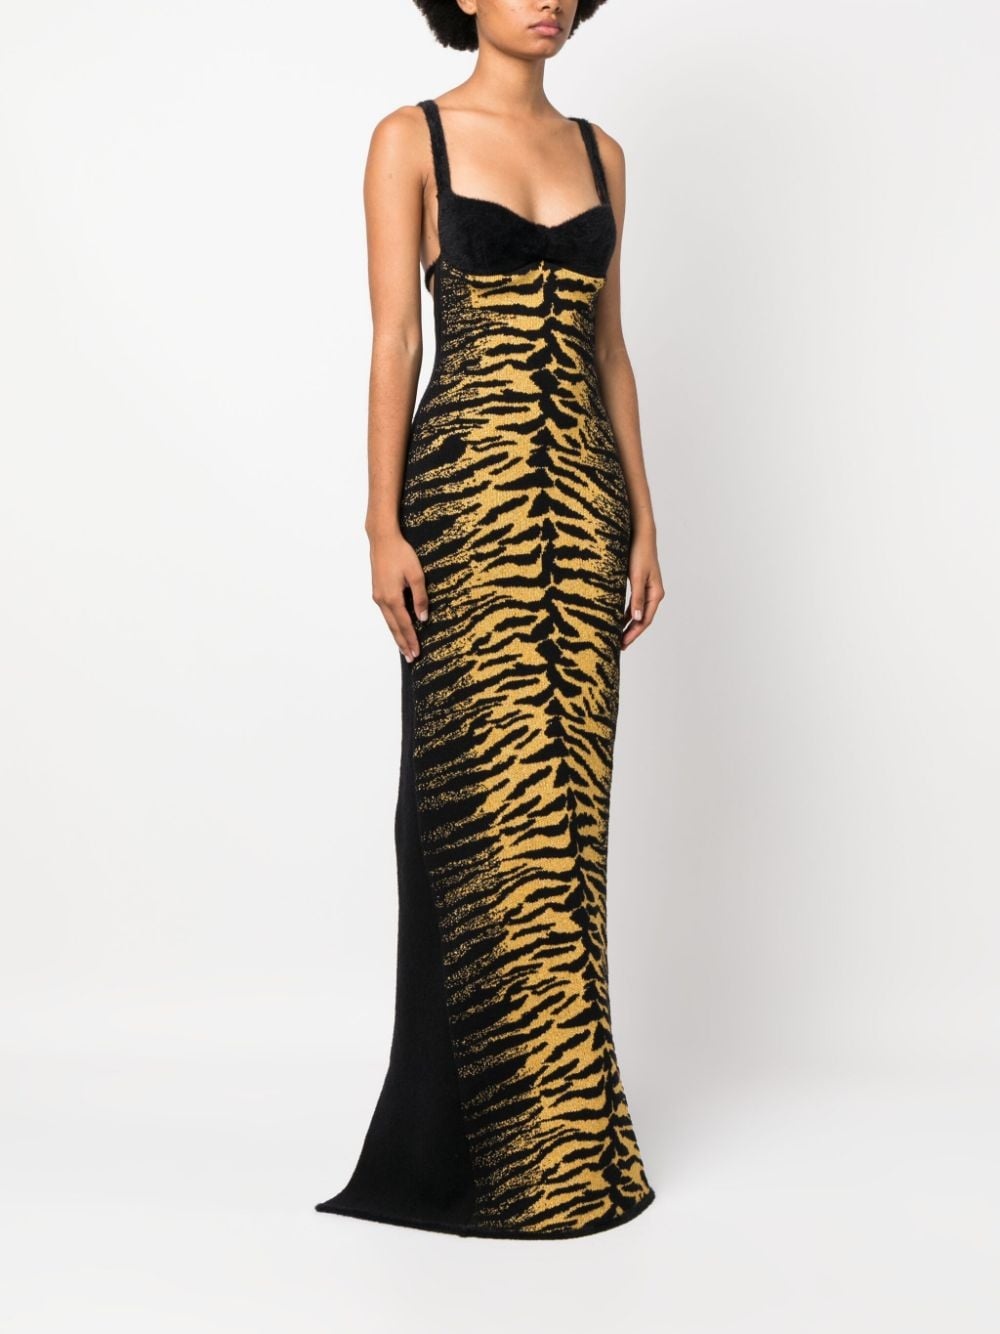 Long yellow and black jacquard dress with degrad?-effect Zebra pattern and crossed straps on the bac - 3